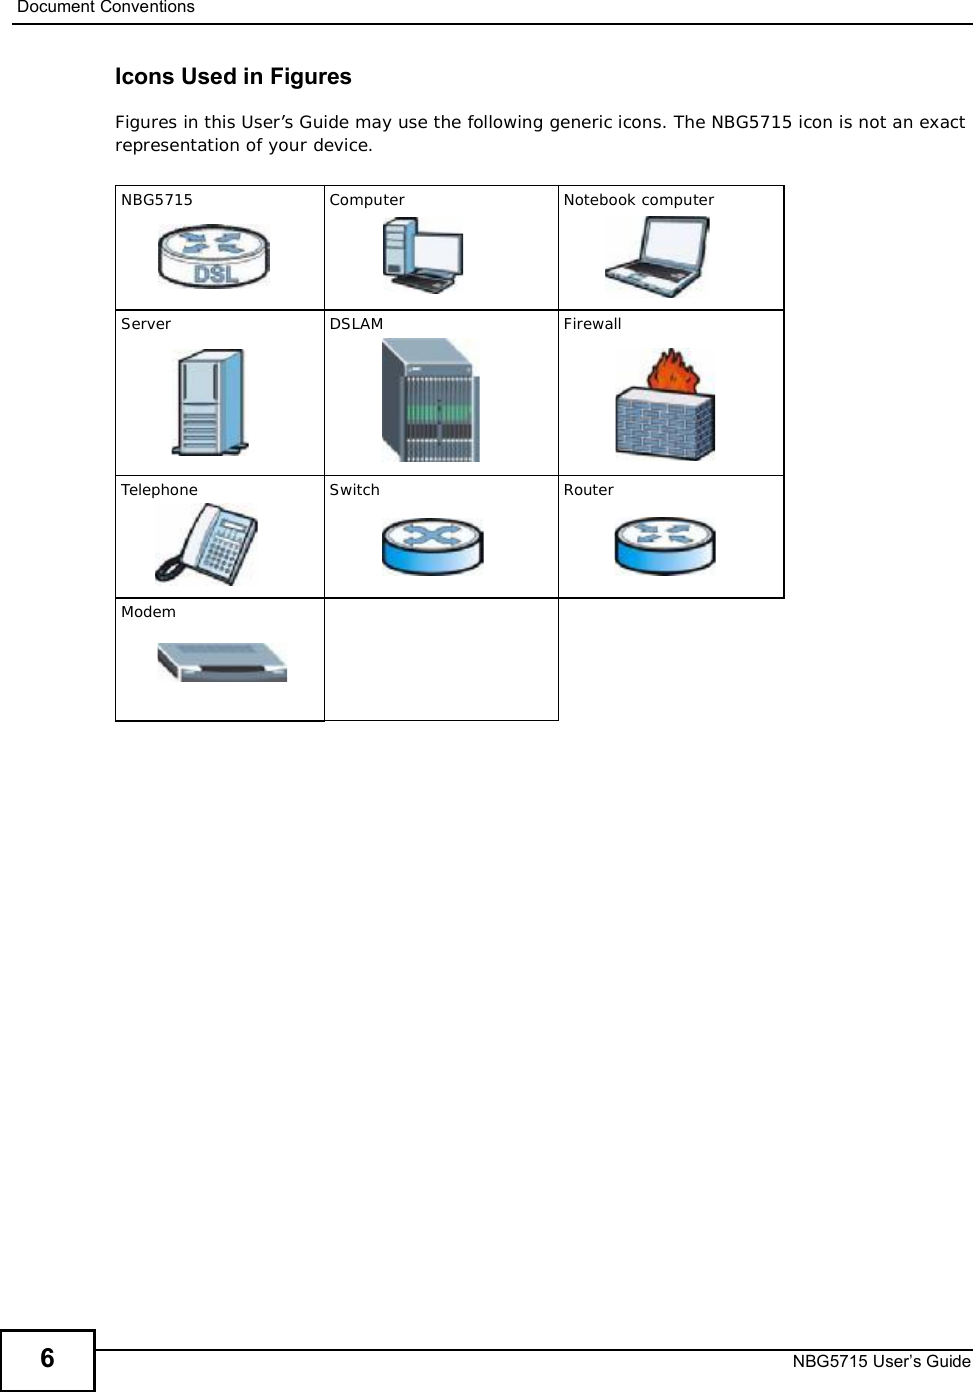 Document ConventionsNBG5715 User’s Guide6Icons Used in FiguresFigures in this User’s Guide may use the following generic icons. The NBG5715 icon is not an exact representation of your device.NBG5715 Computer Notebook computerServer DSLAM FirewallTelephone Switch RouterModem